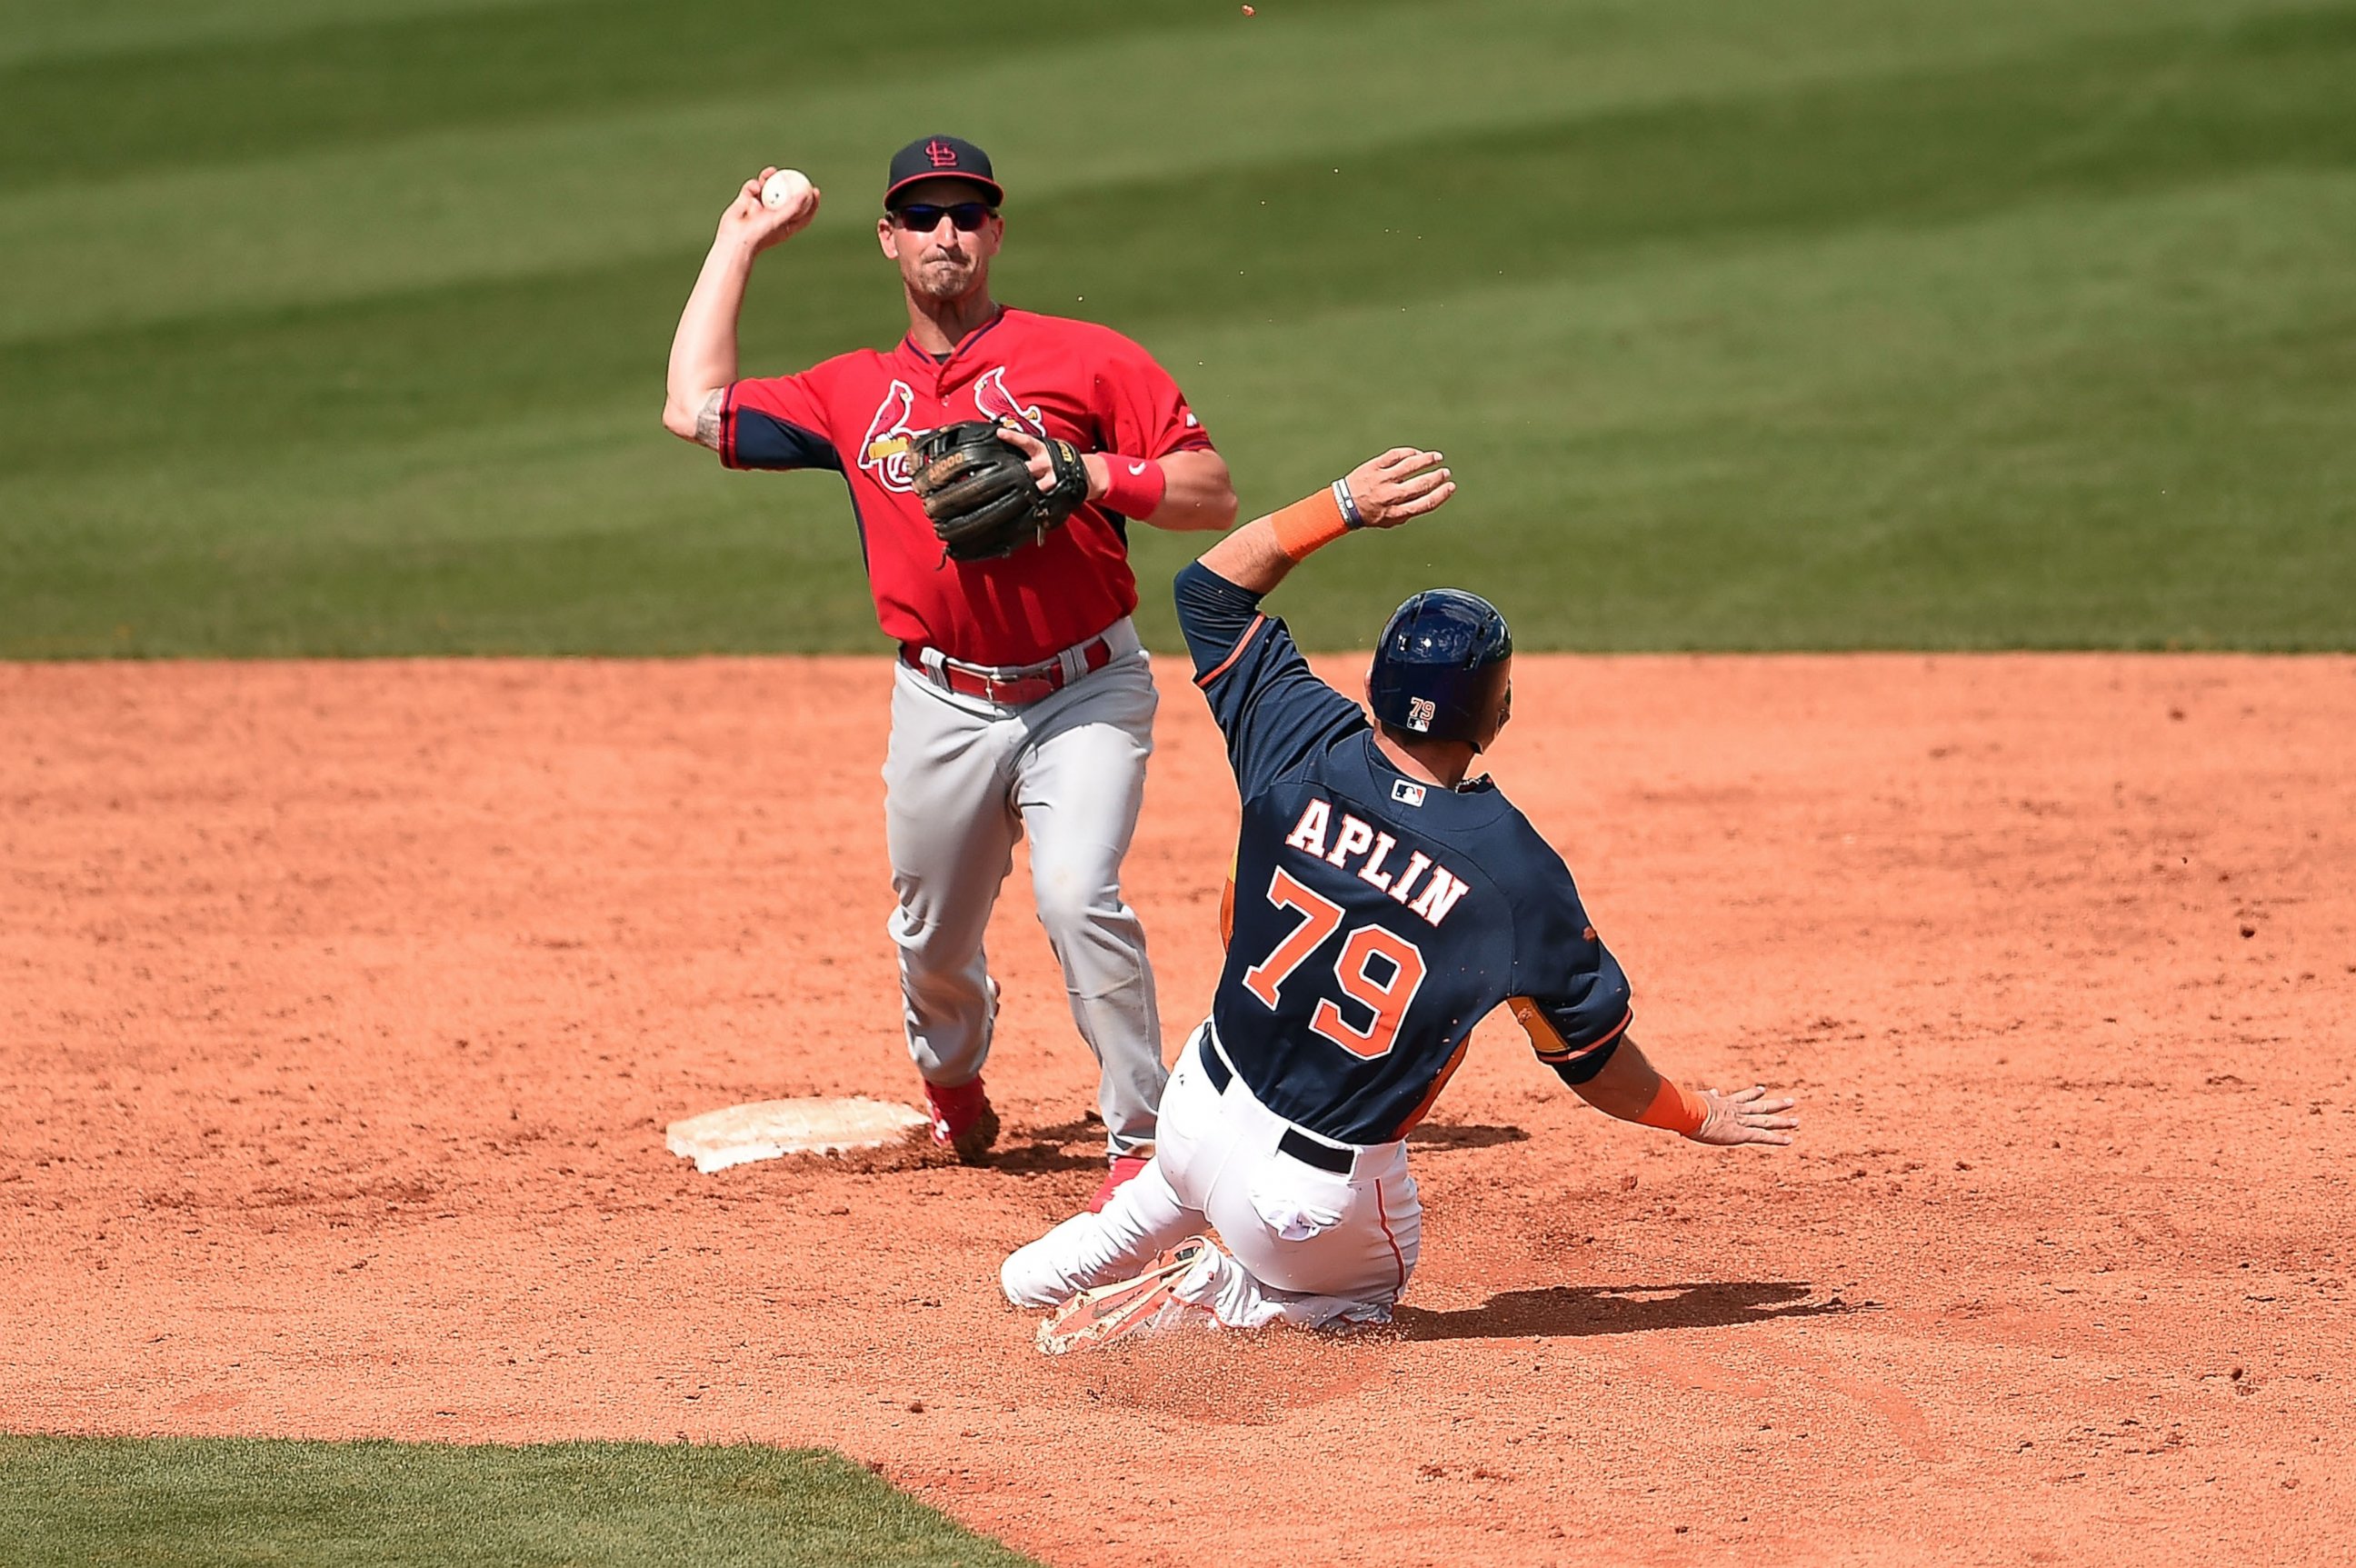 PHOTO: Andrew Aplin of the Houston Astros is tagged out at second base by Dean Anna of the St. Louis Cardinals during a spring training game at Osceola County Stadium on March 10, 2015 in Kissimmee, Fla.